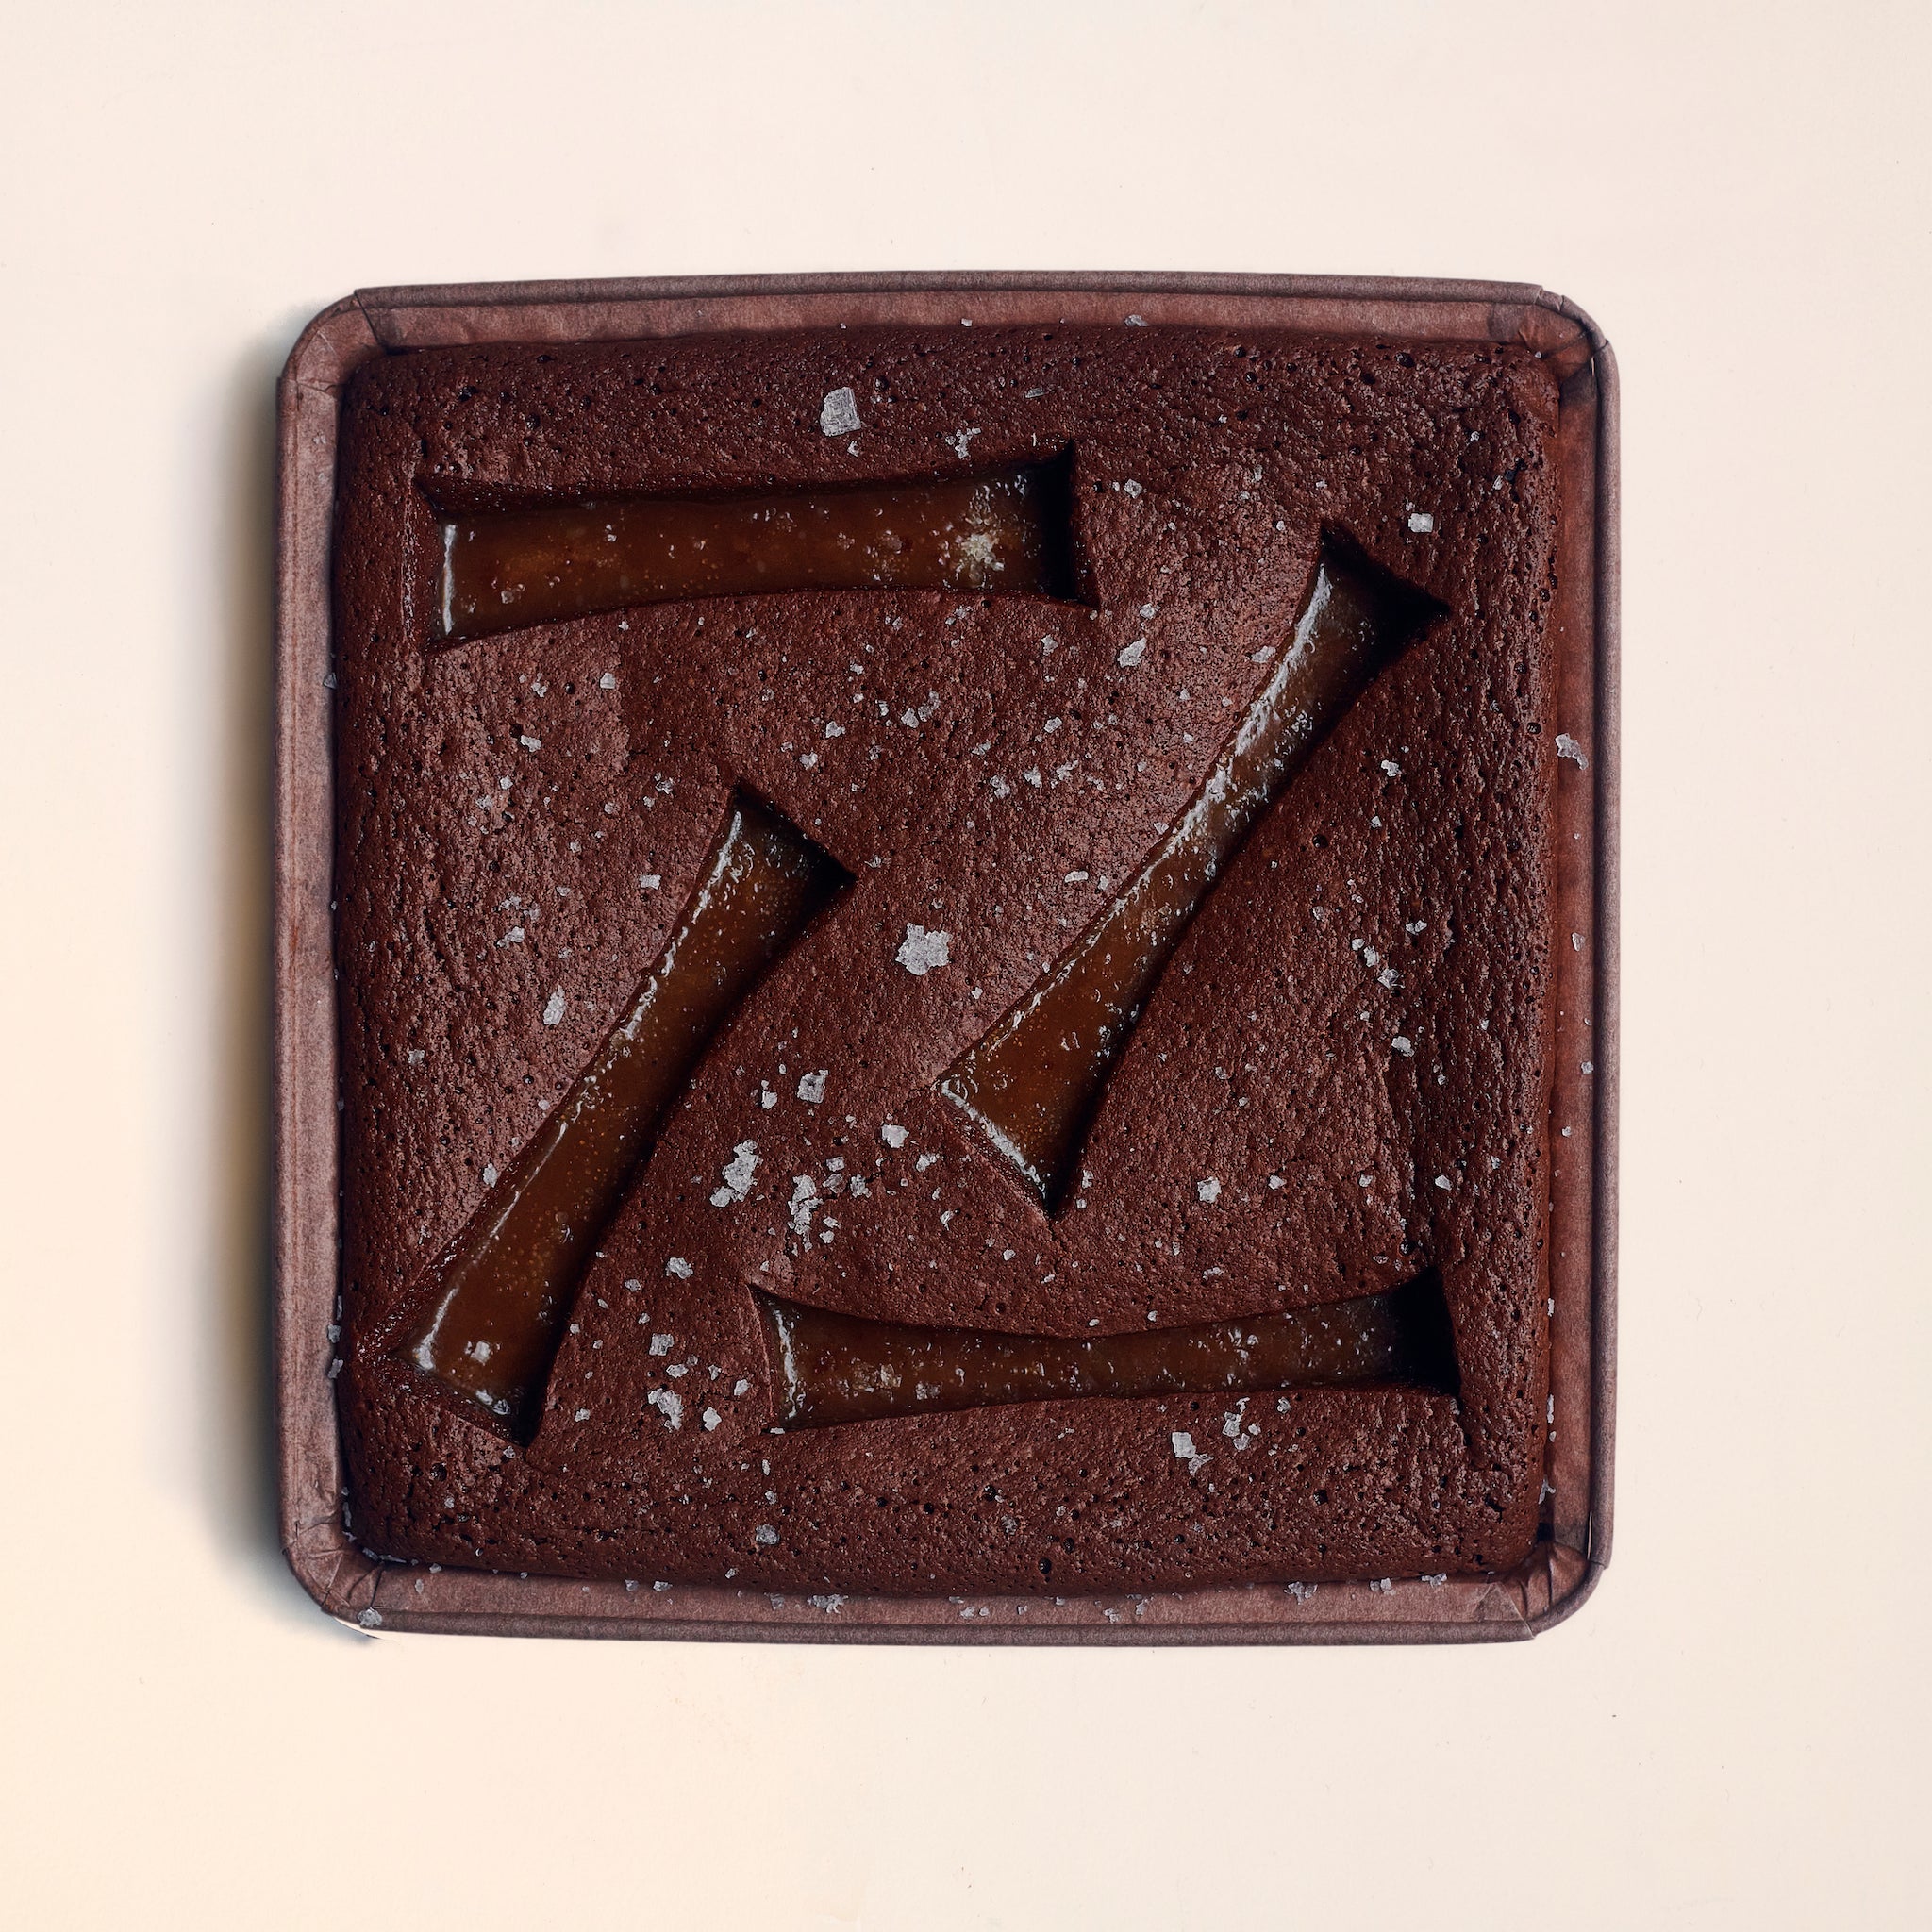 Picture from above, Salted Caramel Letterbox Brownie